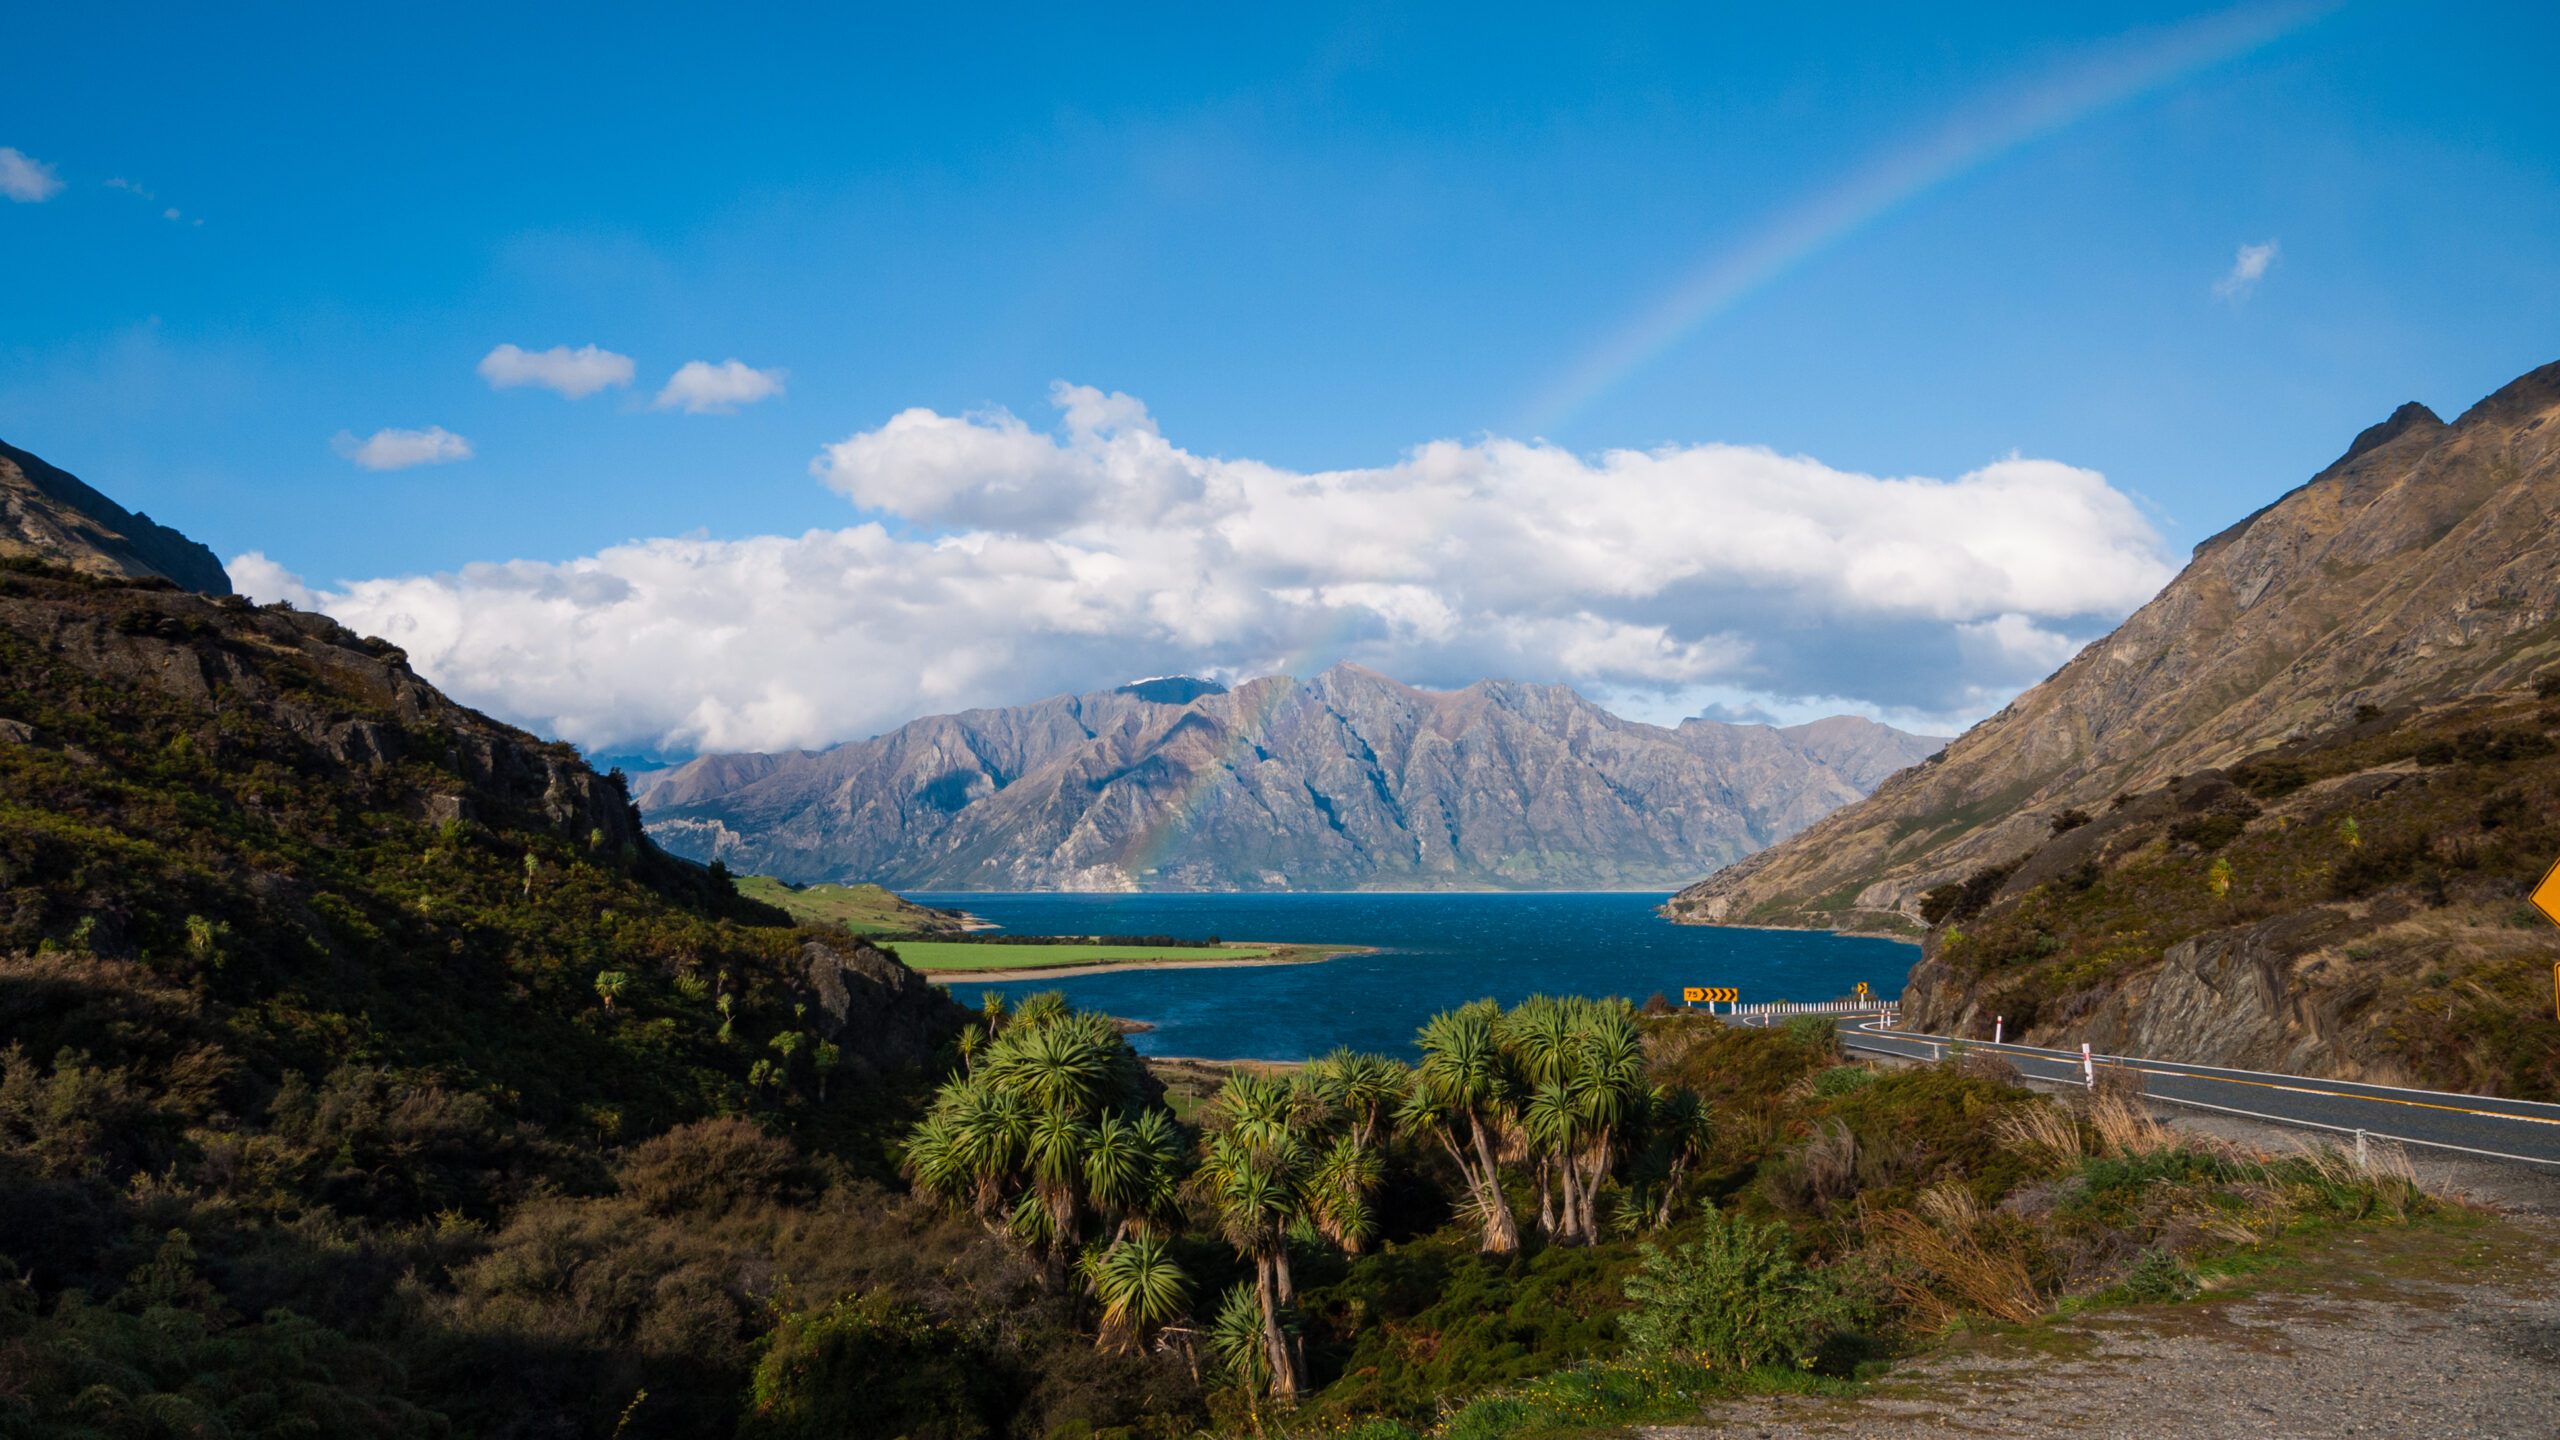 Image showing a view over a large lake with a mountain in the background in New Zealand. The scene is sunny and there is a rainbow arcing from the right of the picture over the blue lake.